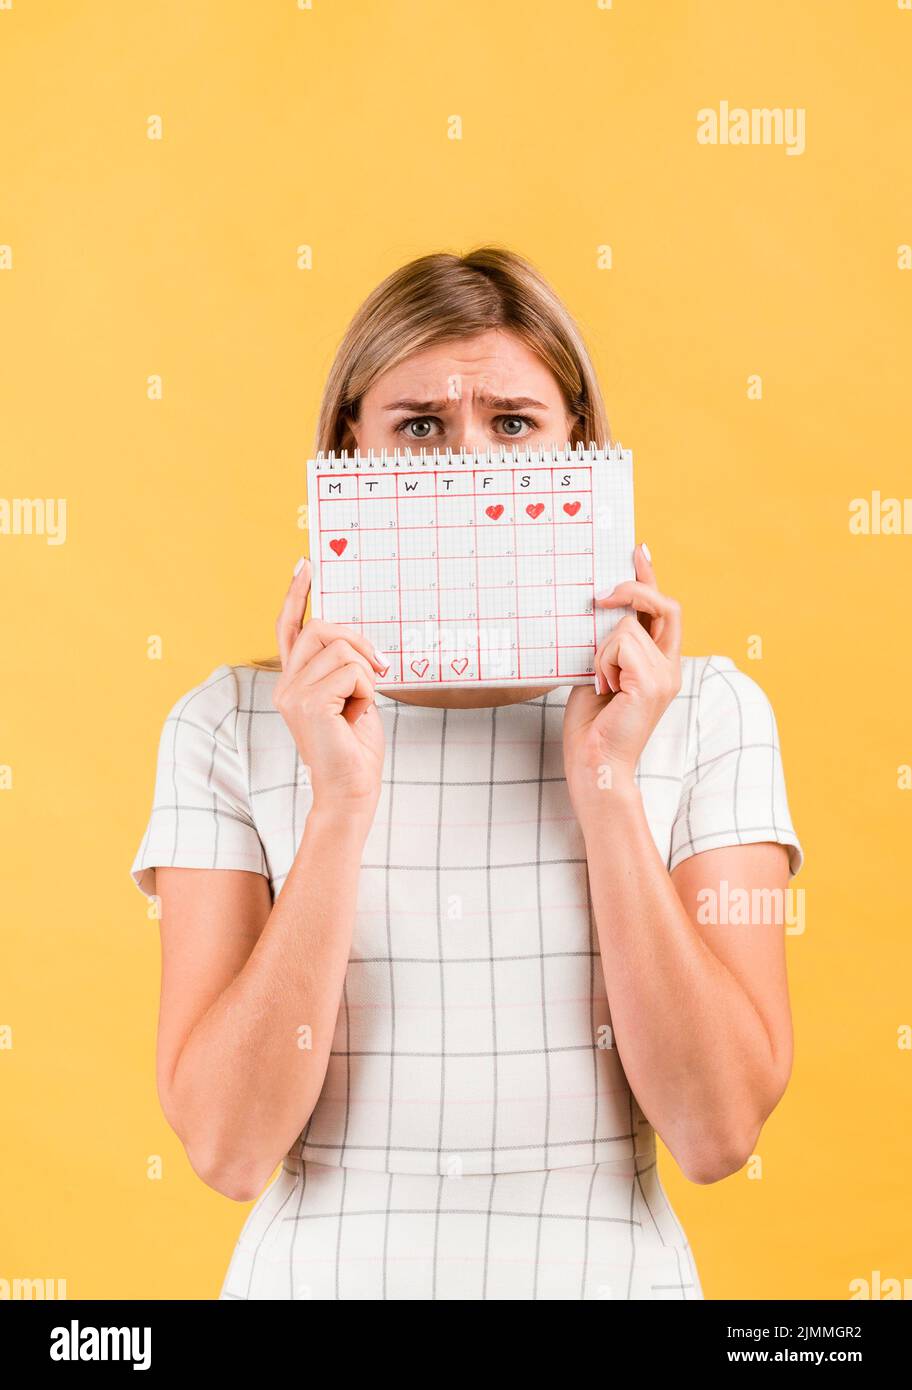 Shocked woman covering her face with period calendar Stock Photo